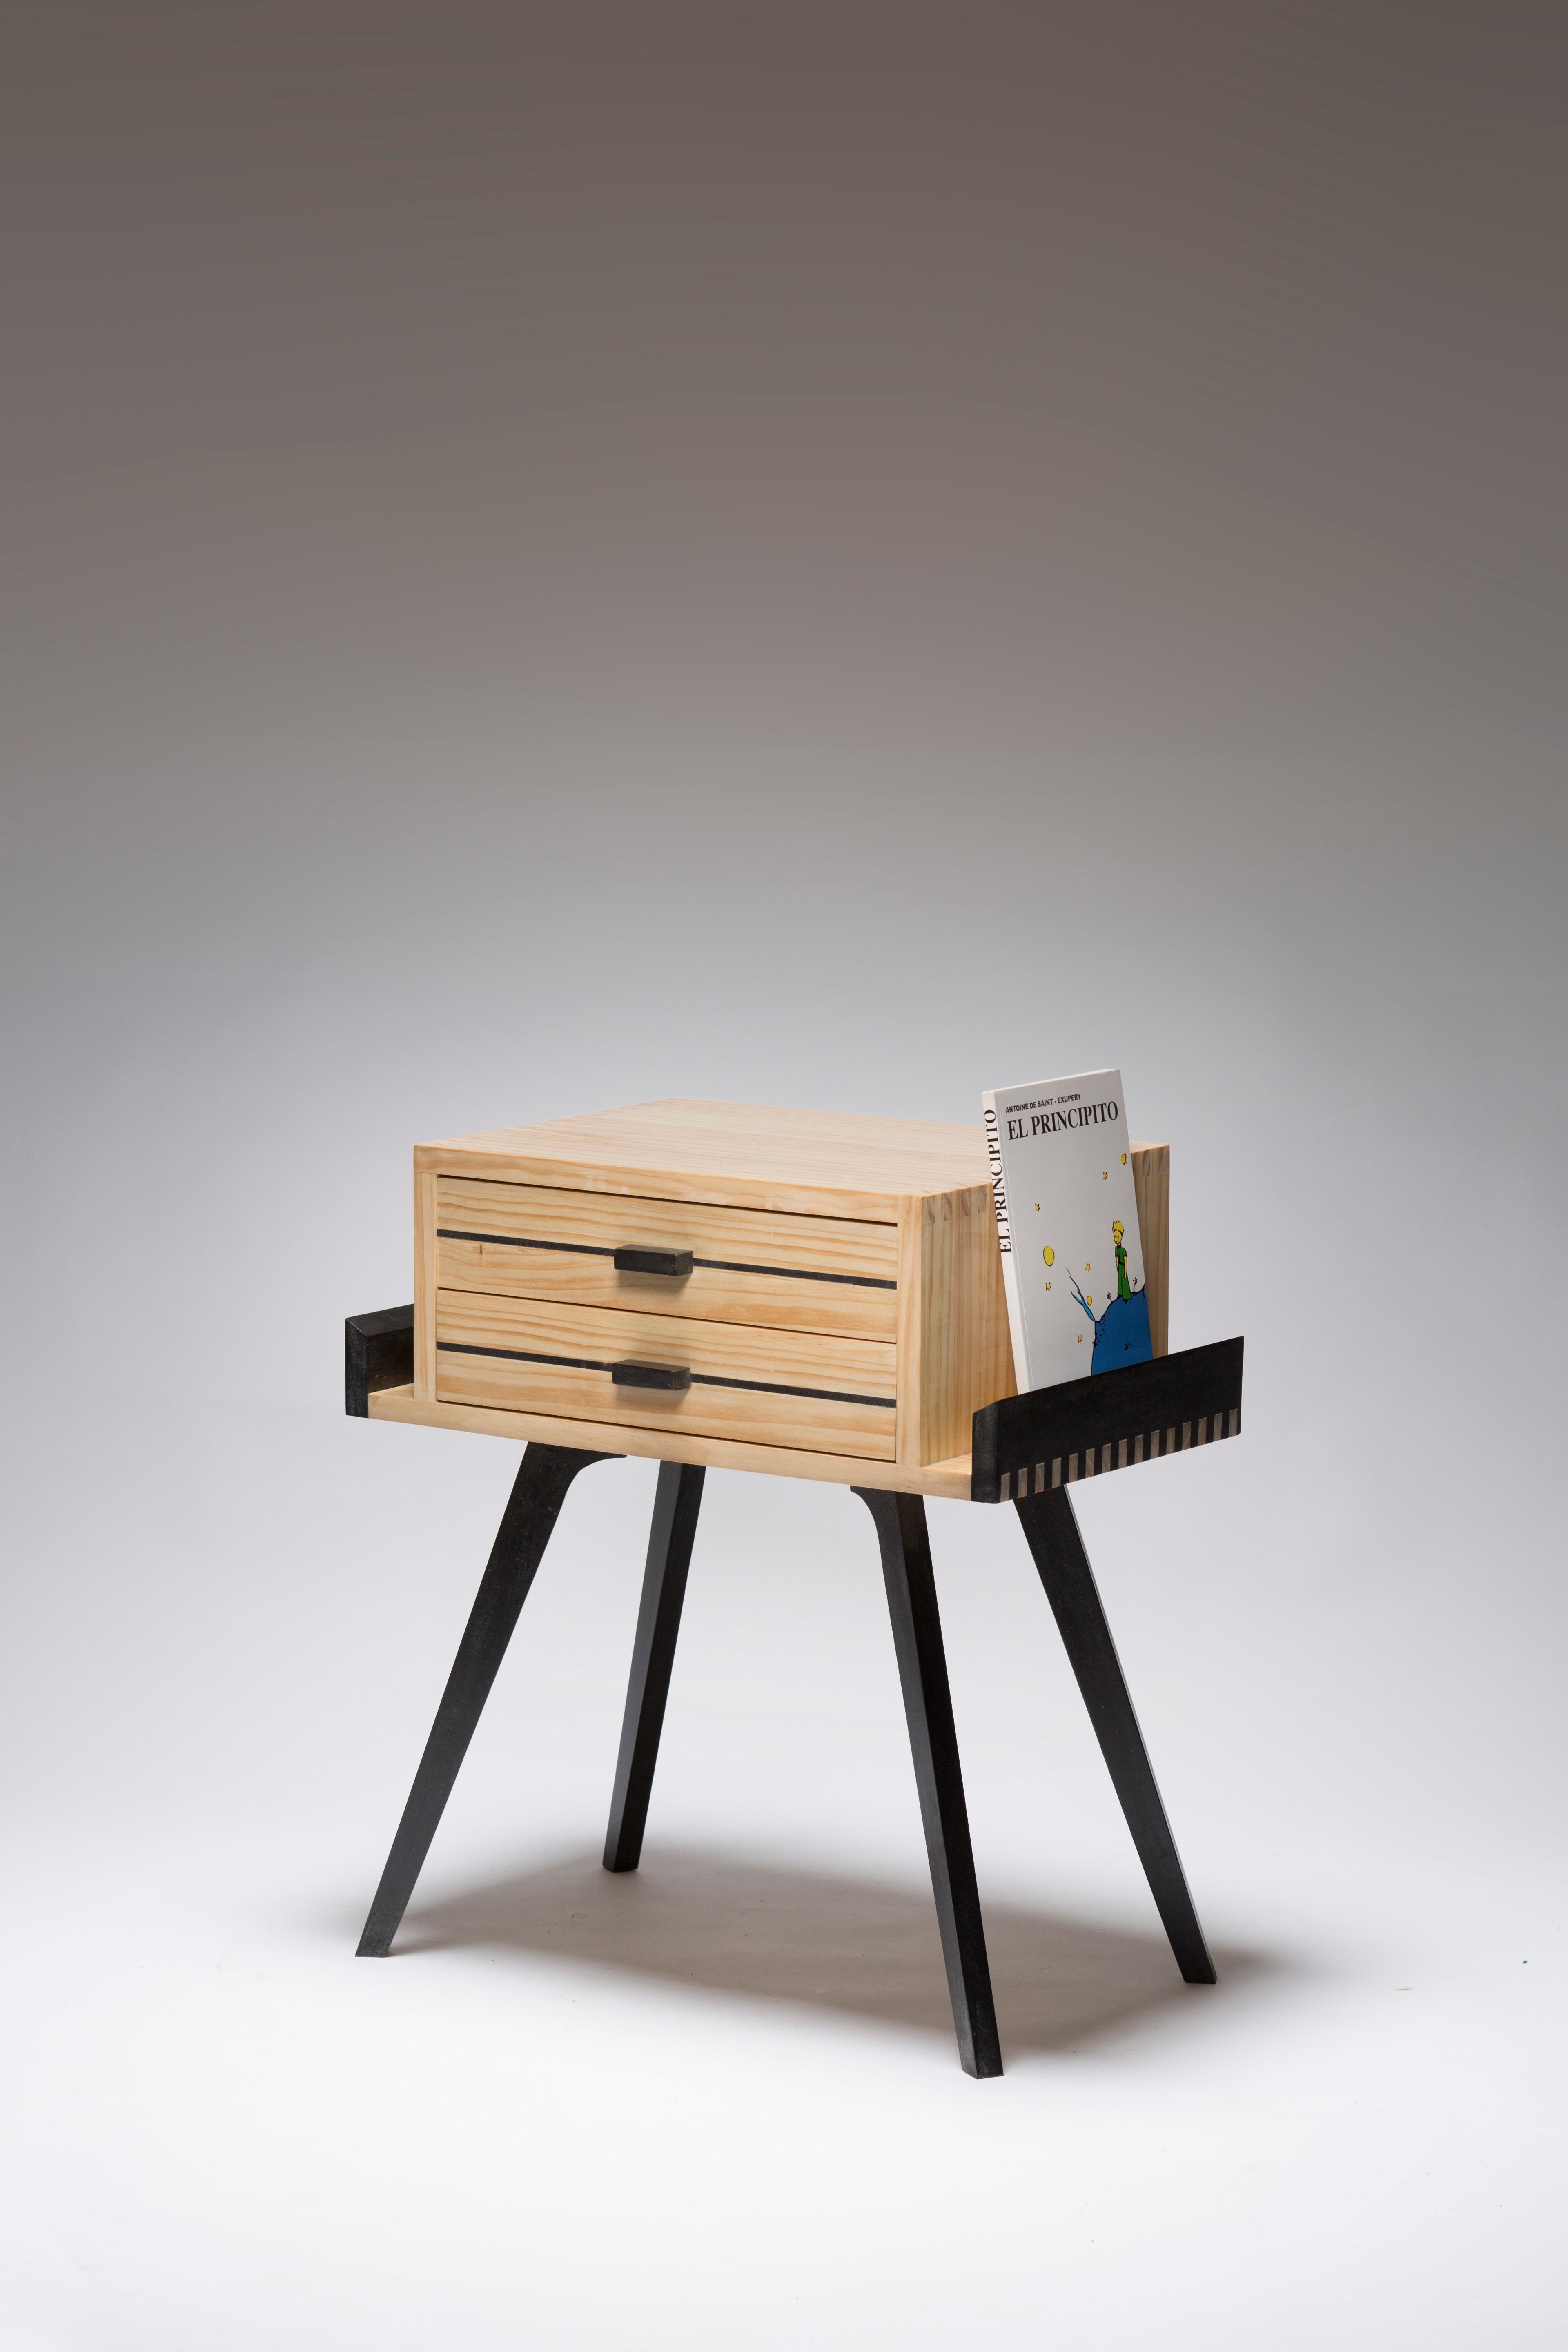 Le Petit nightstand is Inspired to the 50's with its sputnik legs and squared case.
Le Petit nightstand case can be made in different woods and the legs lacquered in different colors, as per client request.
The tray accommodates a book or a pair of